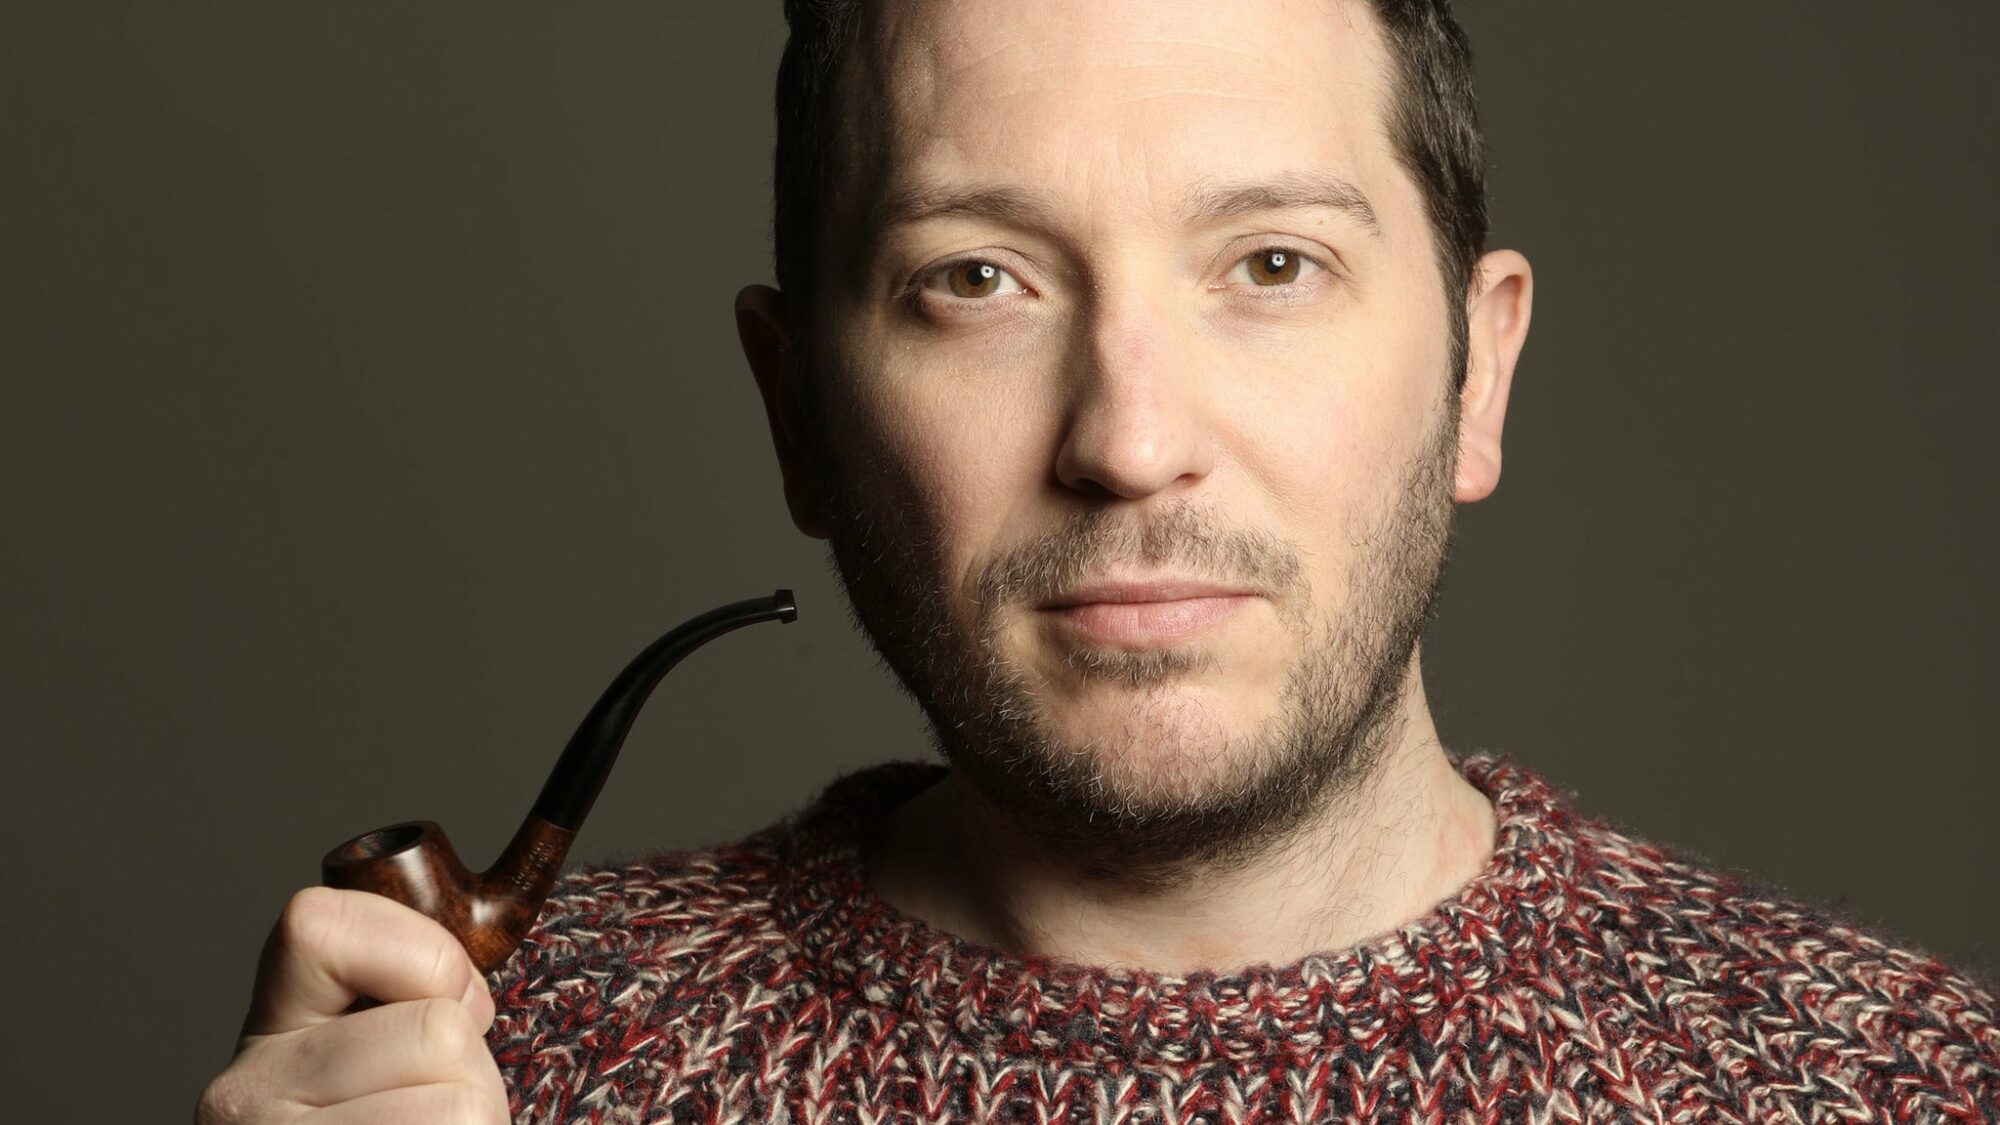 Image name Jon Richardson The Knitwit at Leeds Grand Theatre Leeds the 1 image from the post Jon Richardson at York Barbican, York in Yorkshire.com.